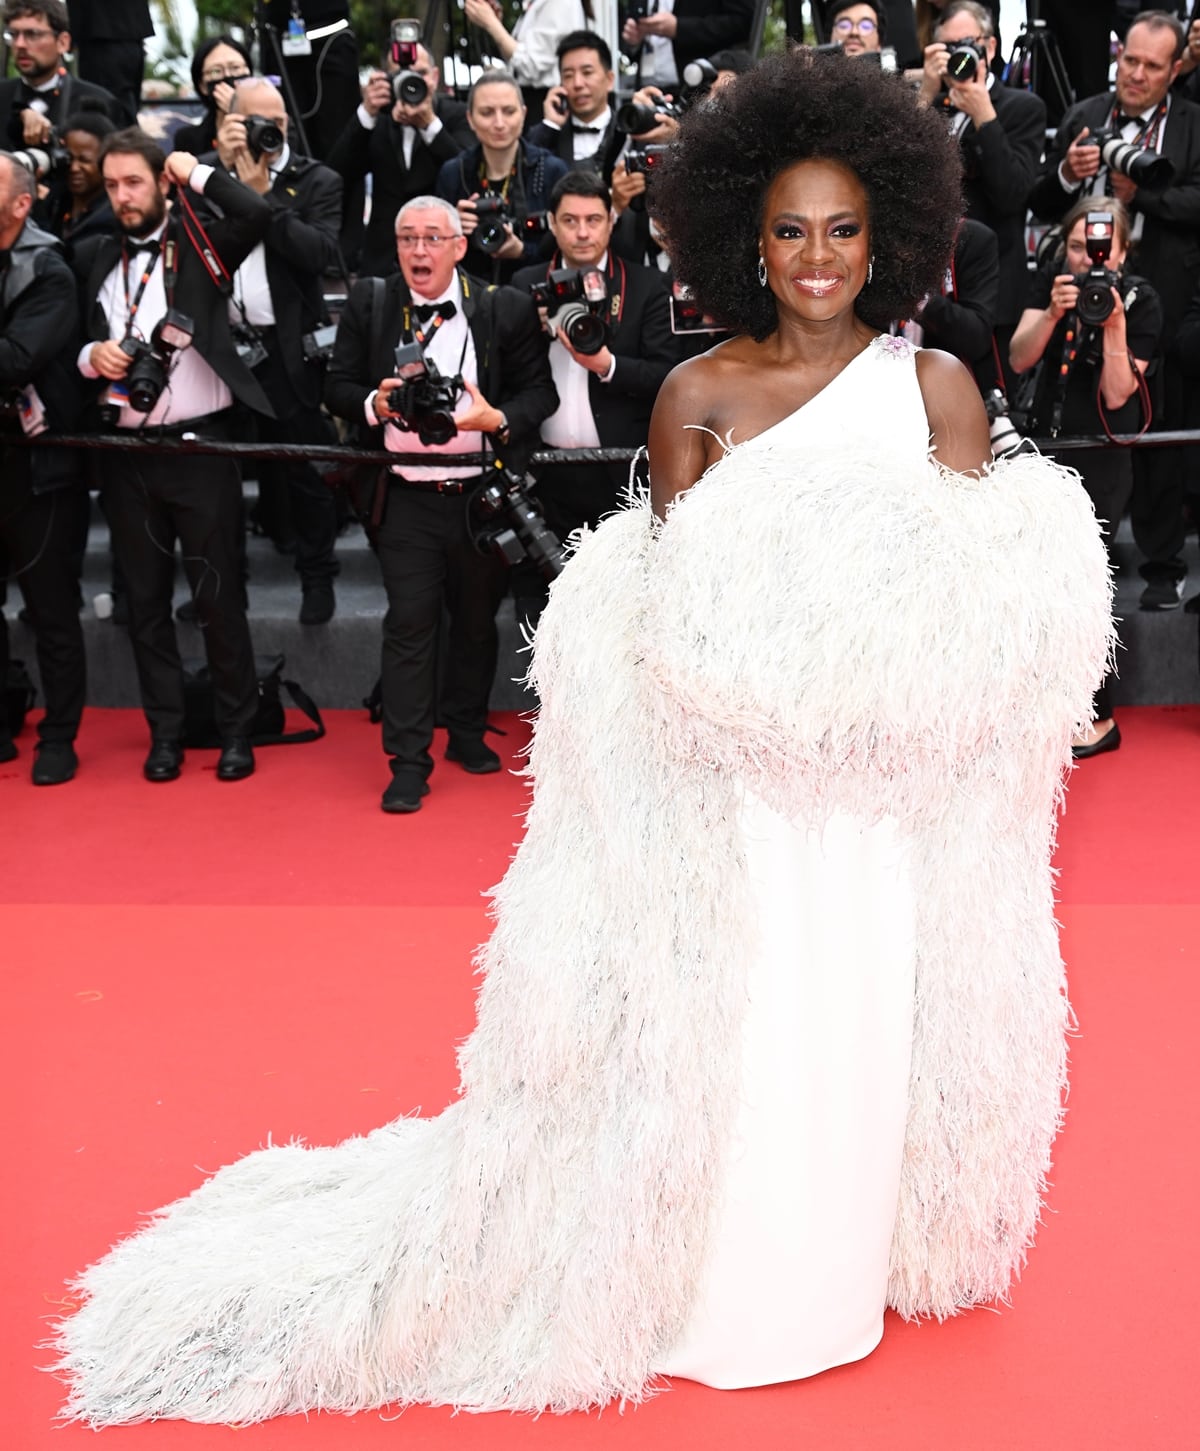 At the 2023 Cannes Film Festival in Cannes, Viola Davis looked stunning in a white gown paired with a captivating feathered coat, both from Valentino couture